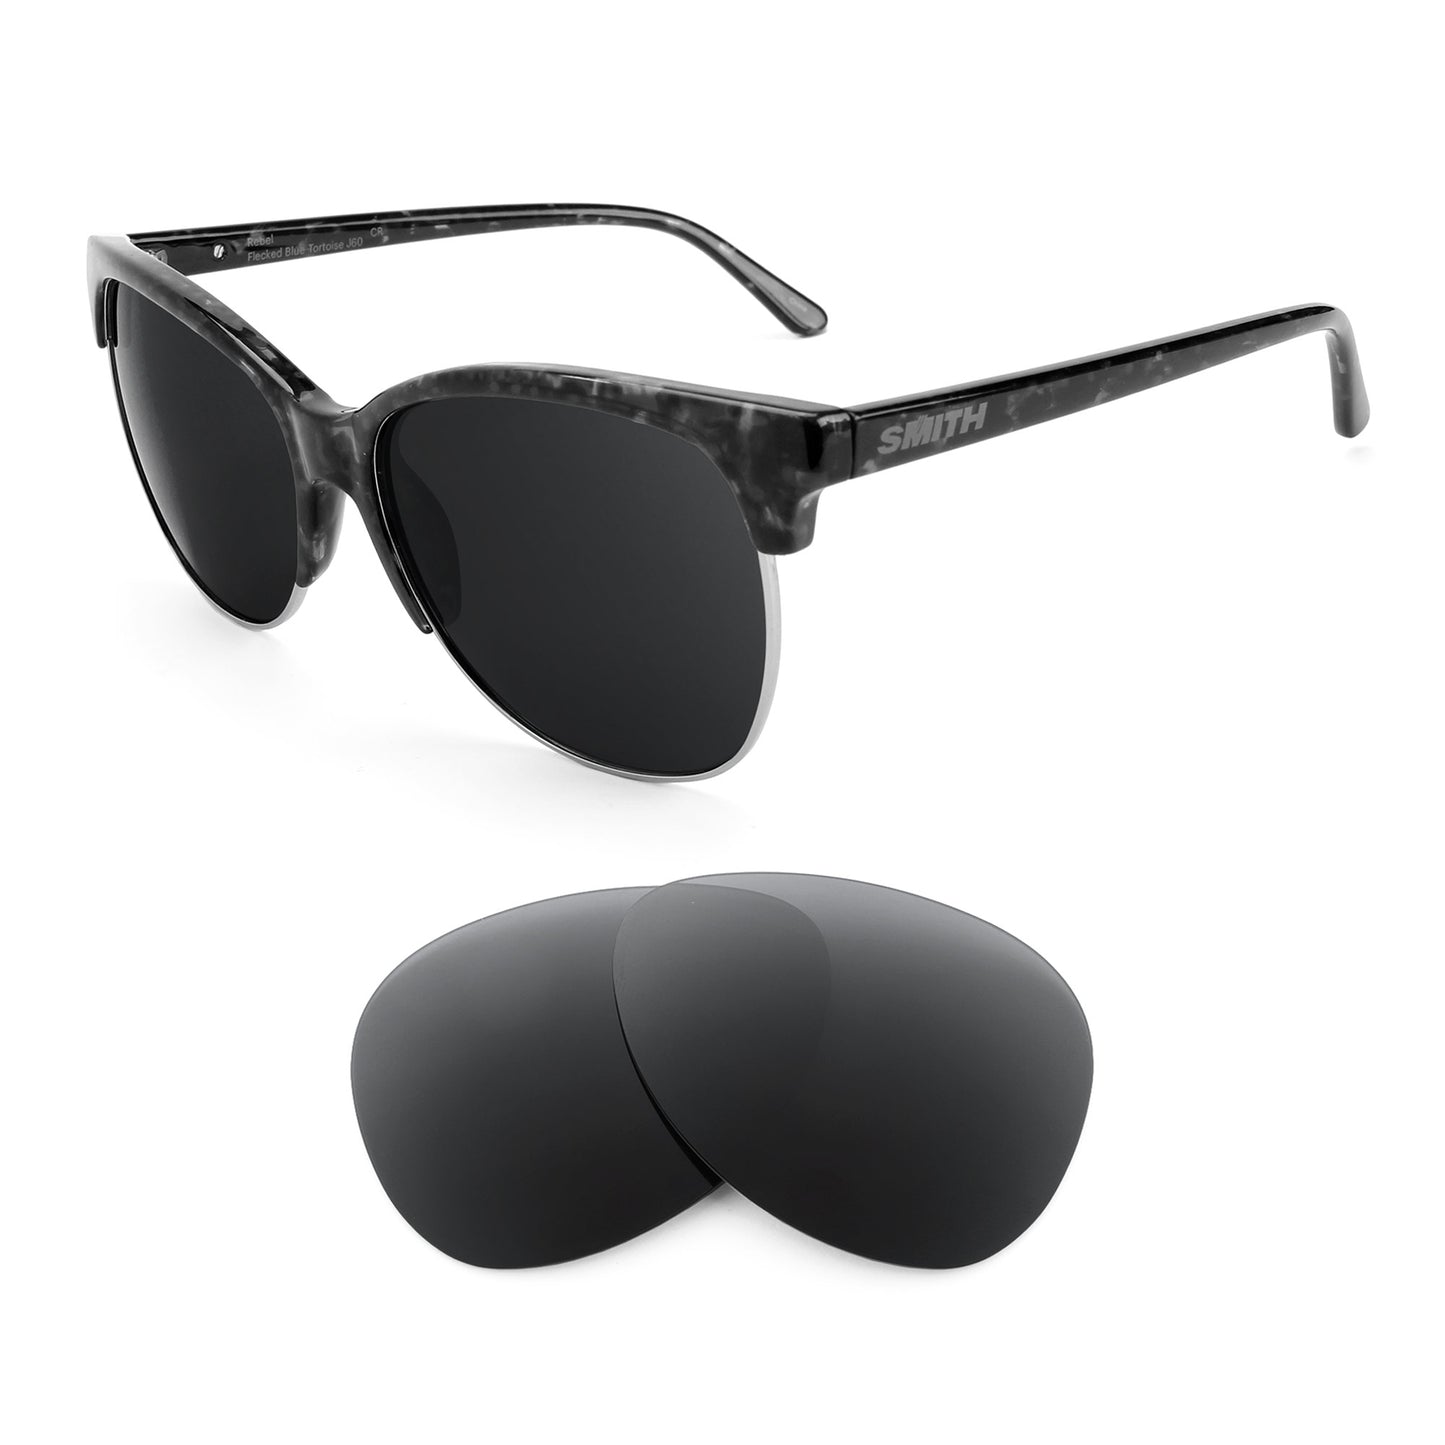 Smith Rebel sunglasses with replacement lenses